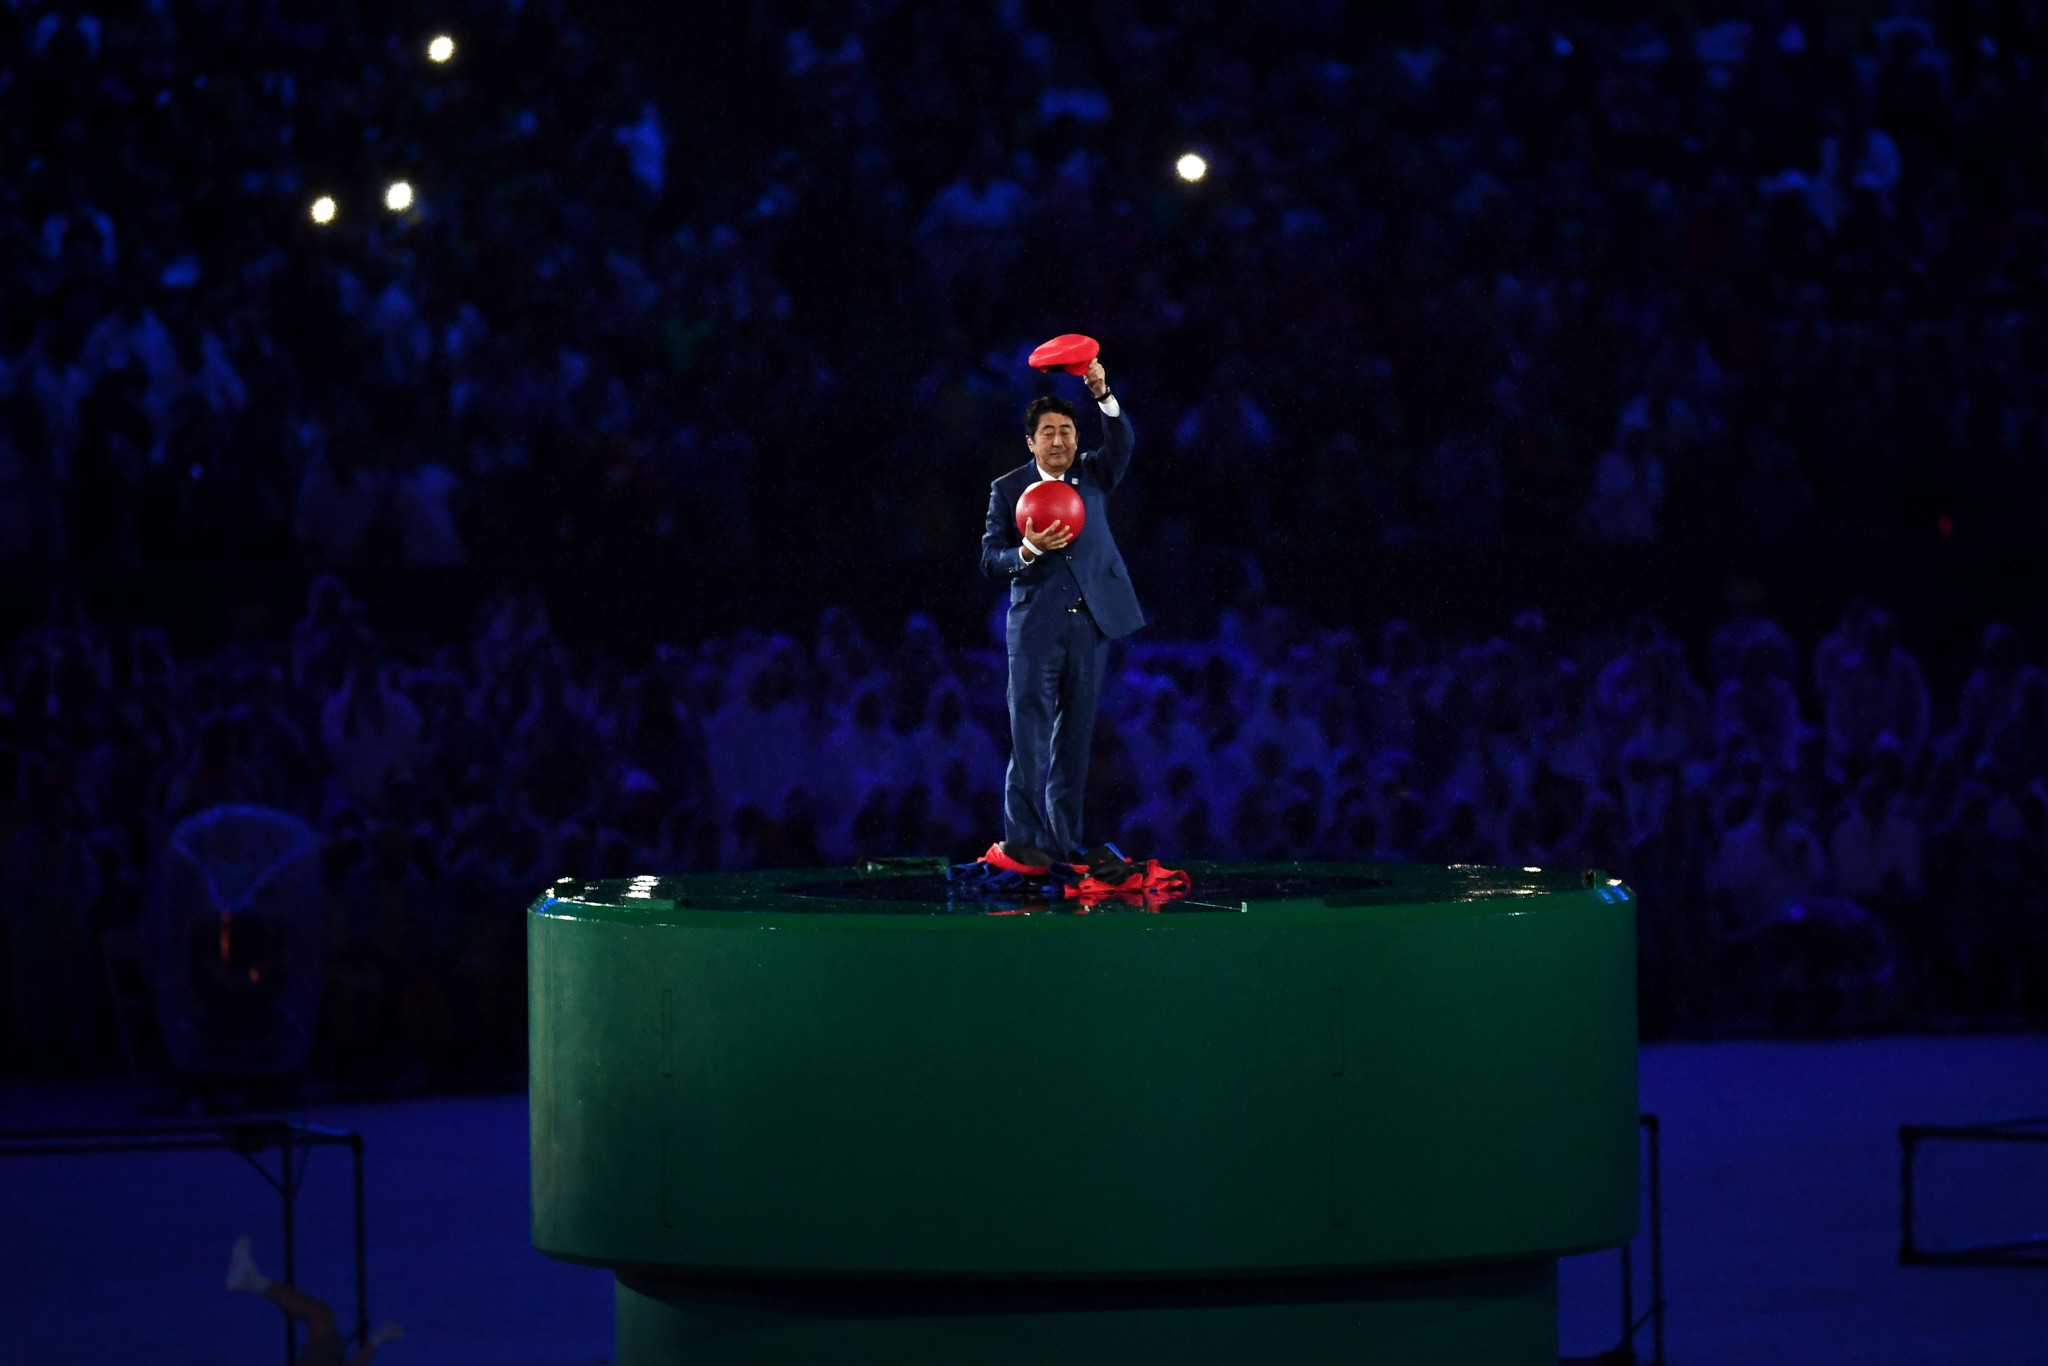 Japanese Prime Minister Shinzō Abe played an active role in the Rio 2016 Closing Ceremony ©Getty Images